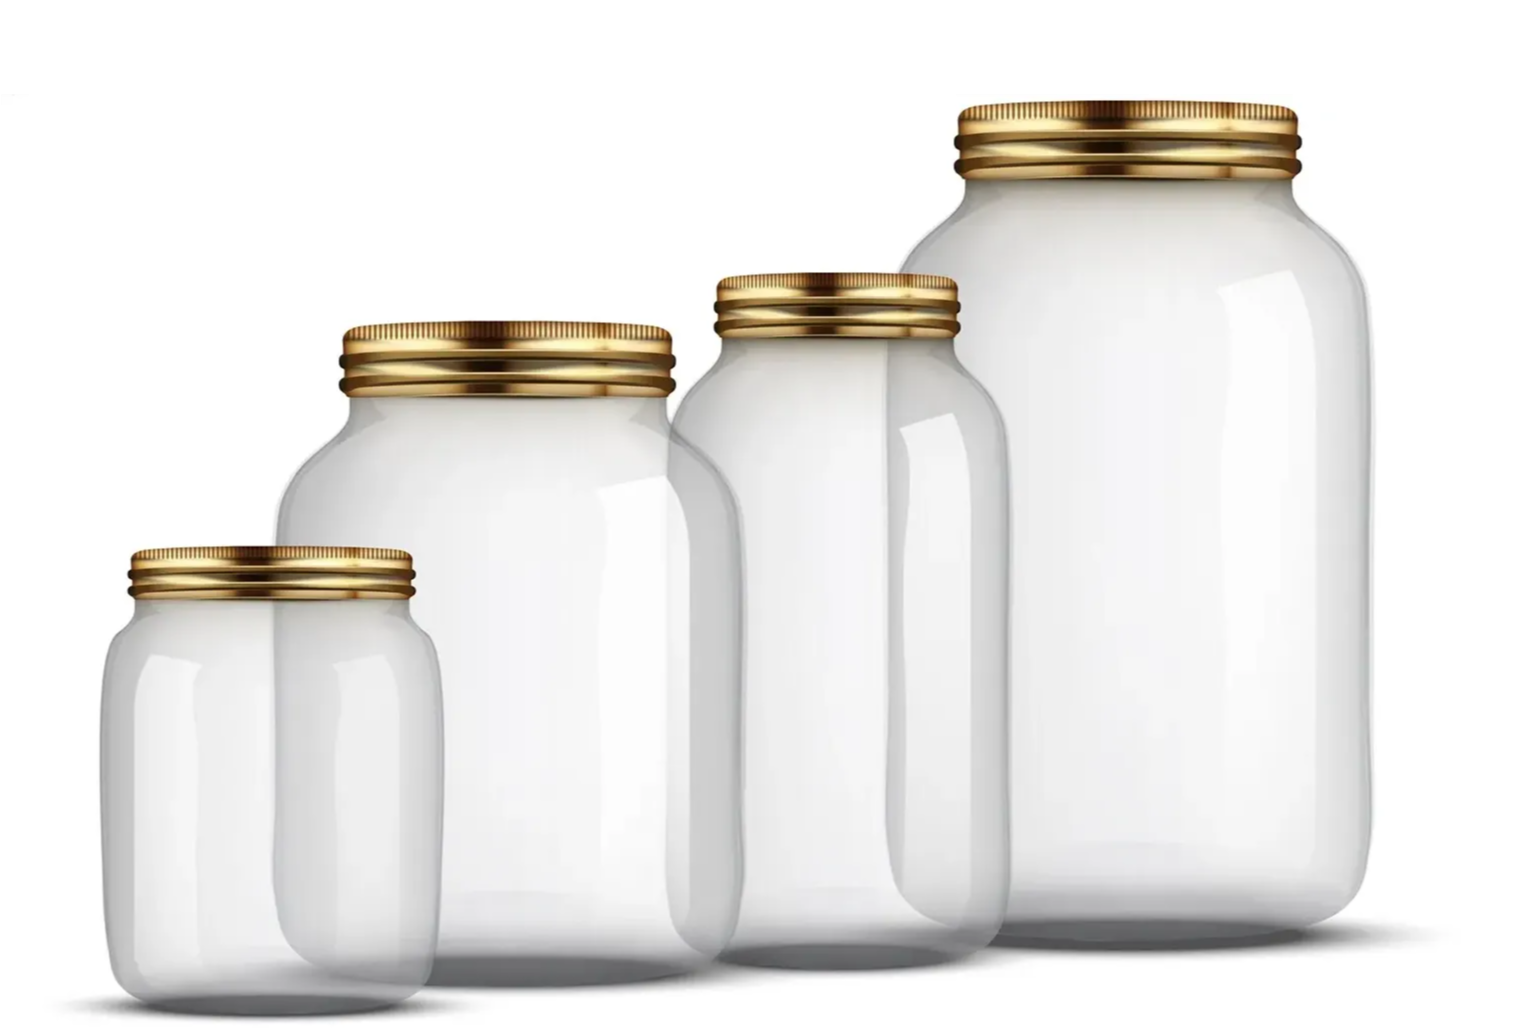 Berlin Packaging mason jars are available in multiple sizes